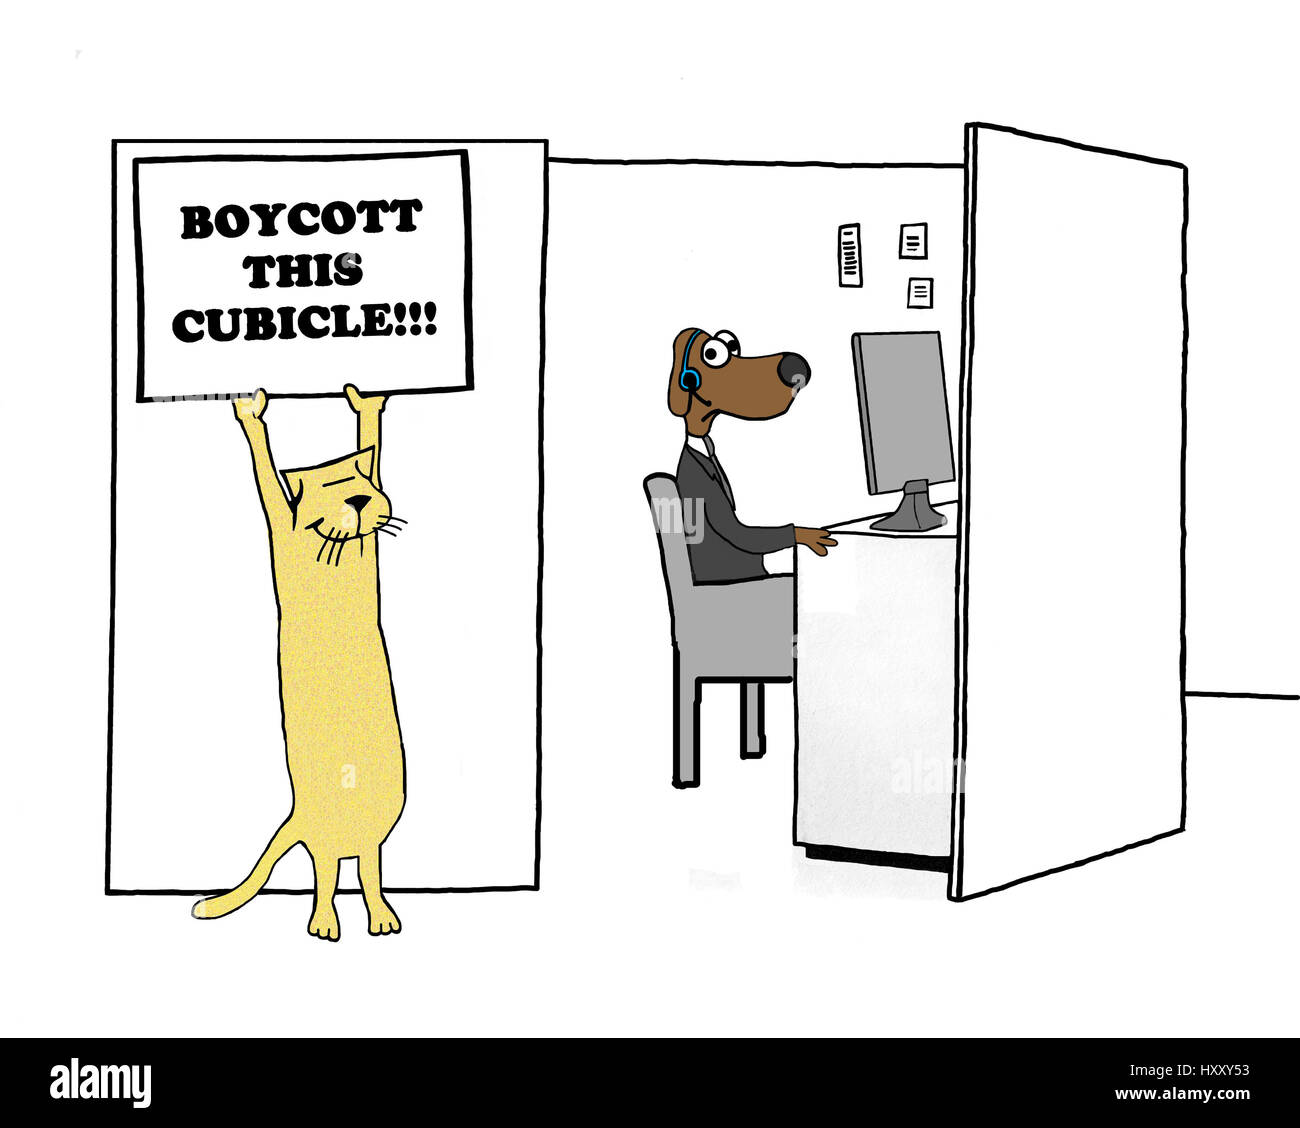 Business cartoon of a worker encouraging others to boycott this cubicle. Stock Photo